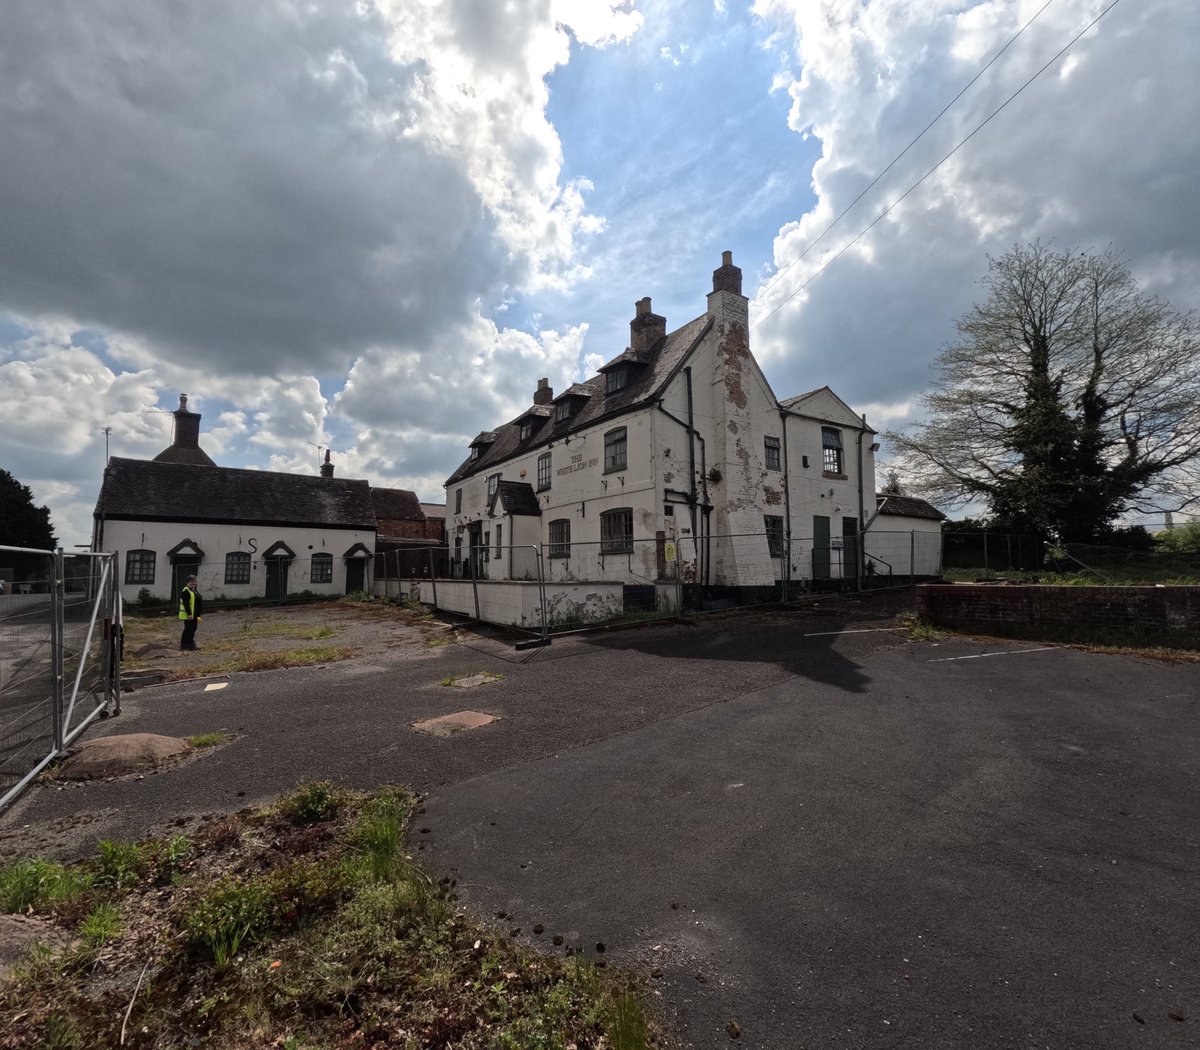 Thanks to all helping Save the White Lion Pailton, to restore it into a community hub. Follow our journey. @HeritageFundM_E @FocusLLP @ArchHFund @Plunkett_UK @PurpleMastodon @CAMRA_Official @greenwoods__ _ @BFFarchitects 
#communityhub
#communityshop
#communitypub
#renovate